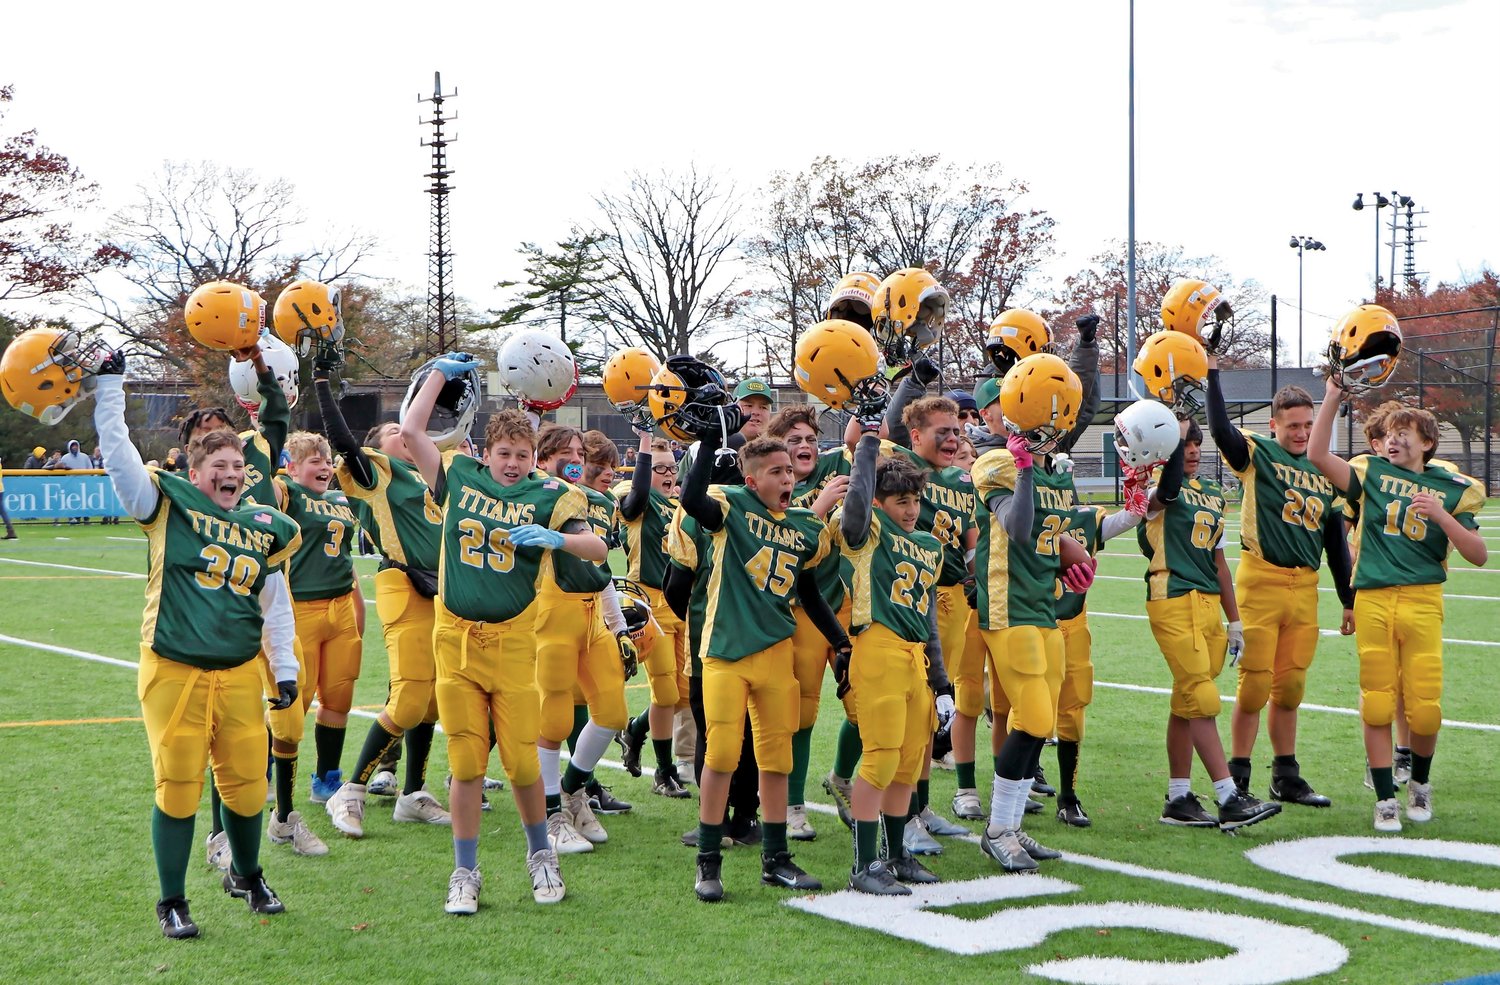 The 12 year-old Titans Football team cheering as they won their playoff game.